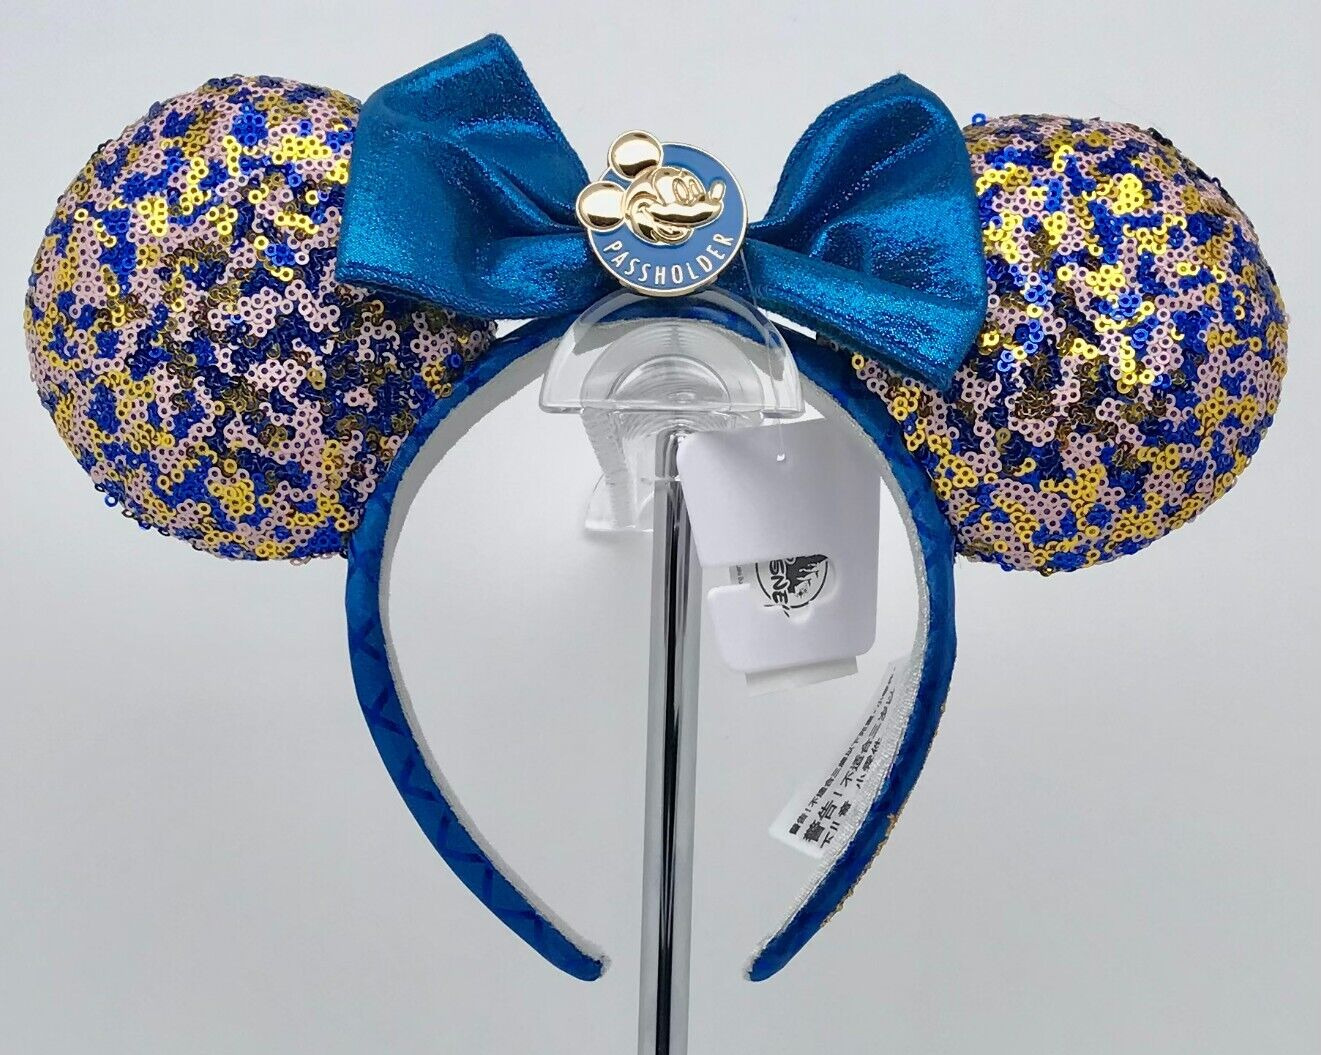 DISNEY PARKS 2021 ANNUAL PASSHOLDER BLUE SEQUINED MINNIE MOUSE BOW EARS NEW